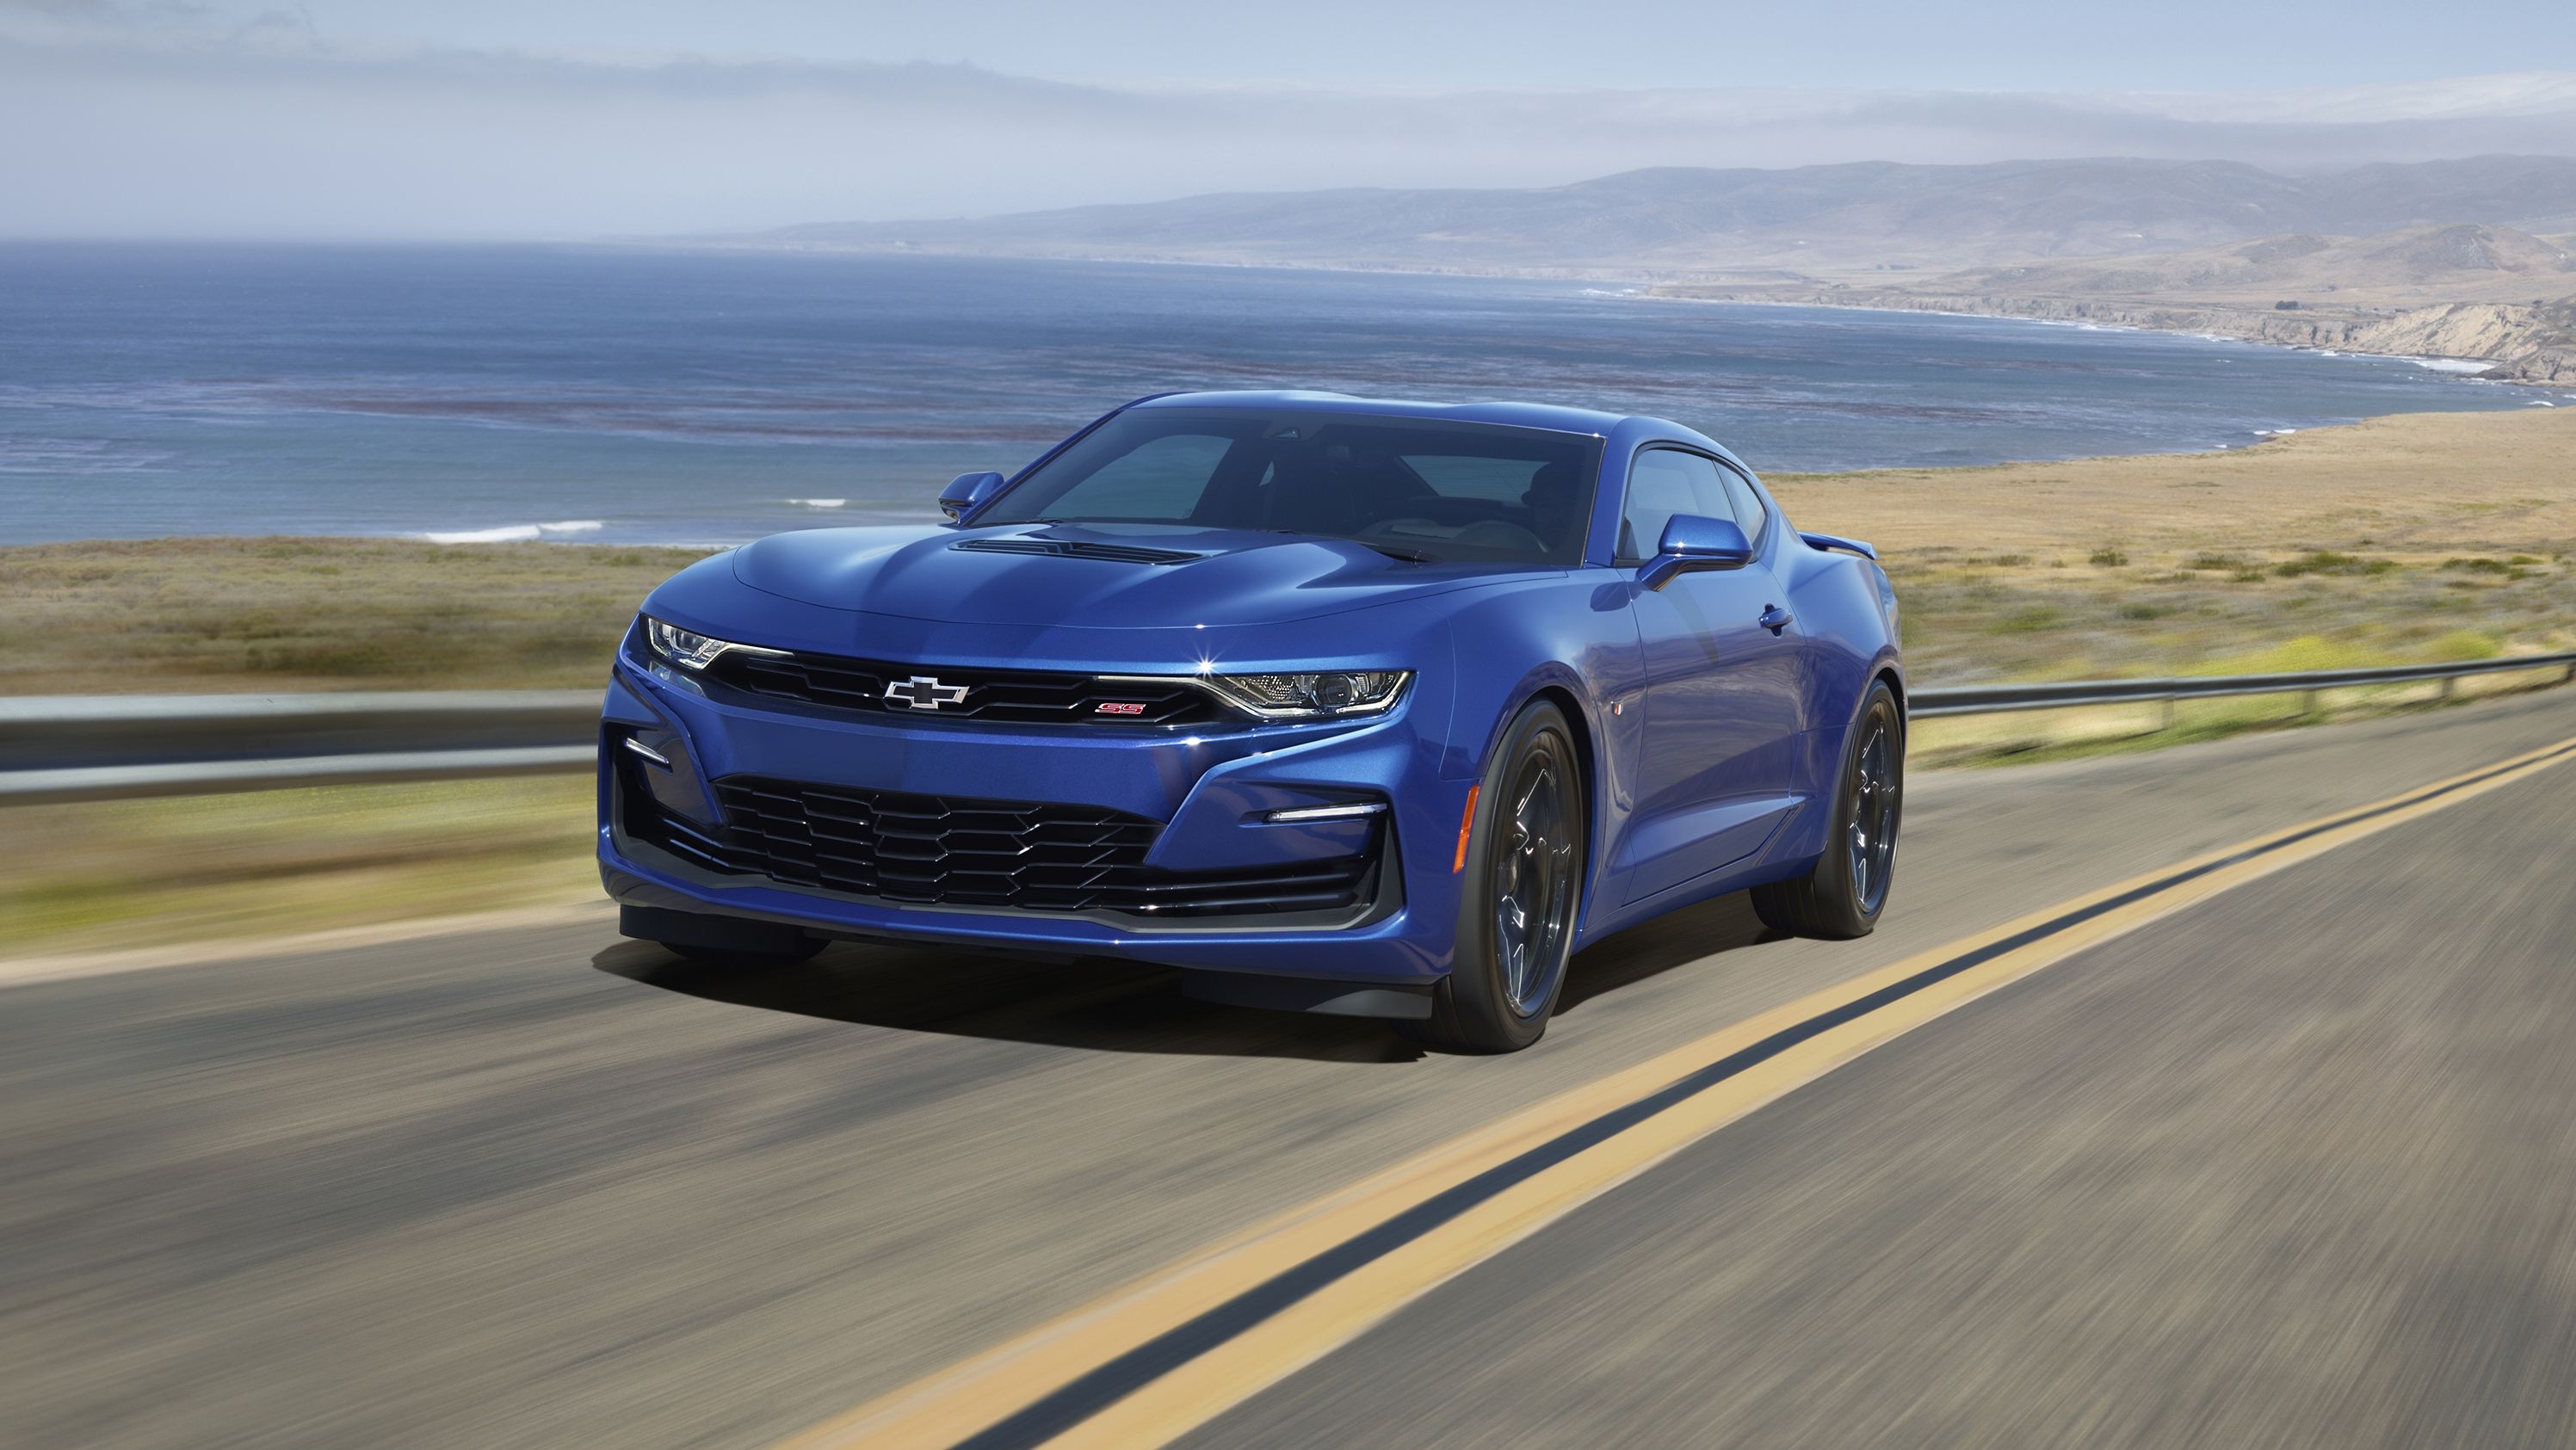 2021 You Might Not Like What’s About to Happen to the Chevy Camaro